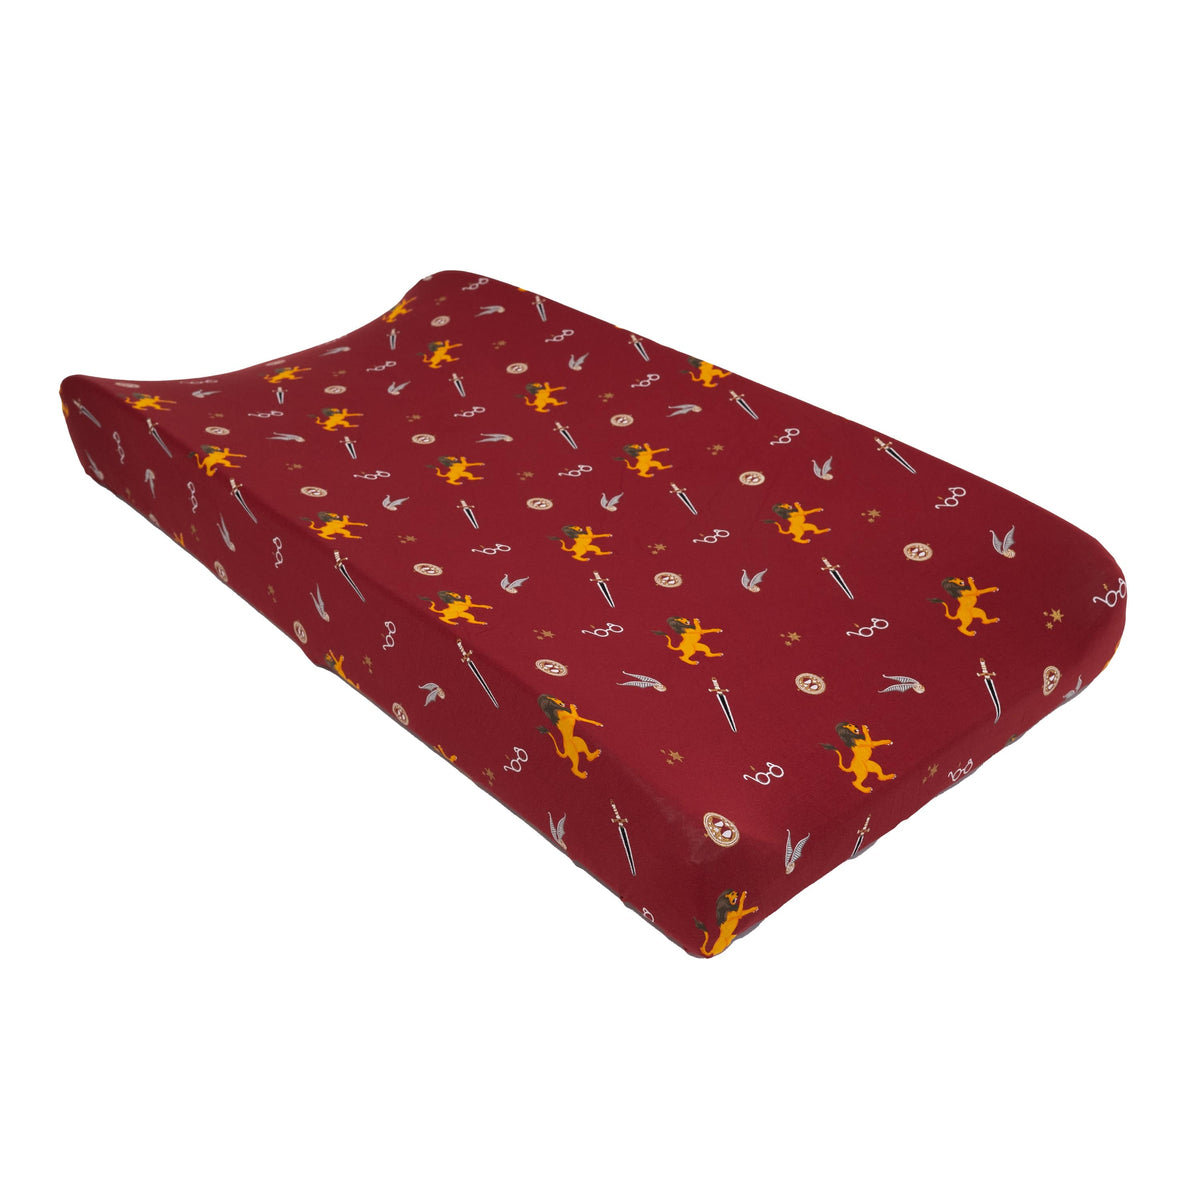 Kyte Baby Change Pad Cover Gryffindor™ / One Size Change Pad Cover in Gryffindor™